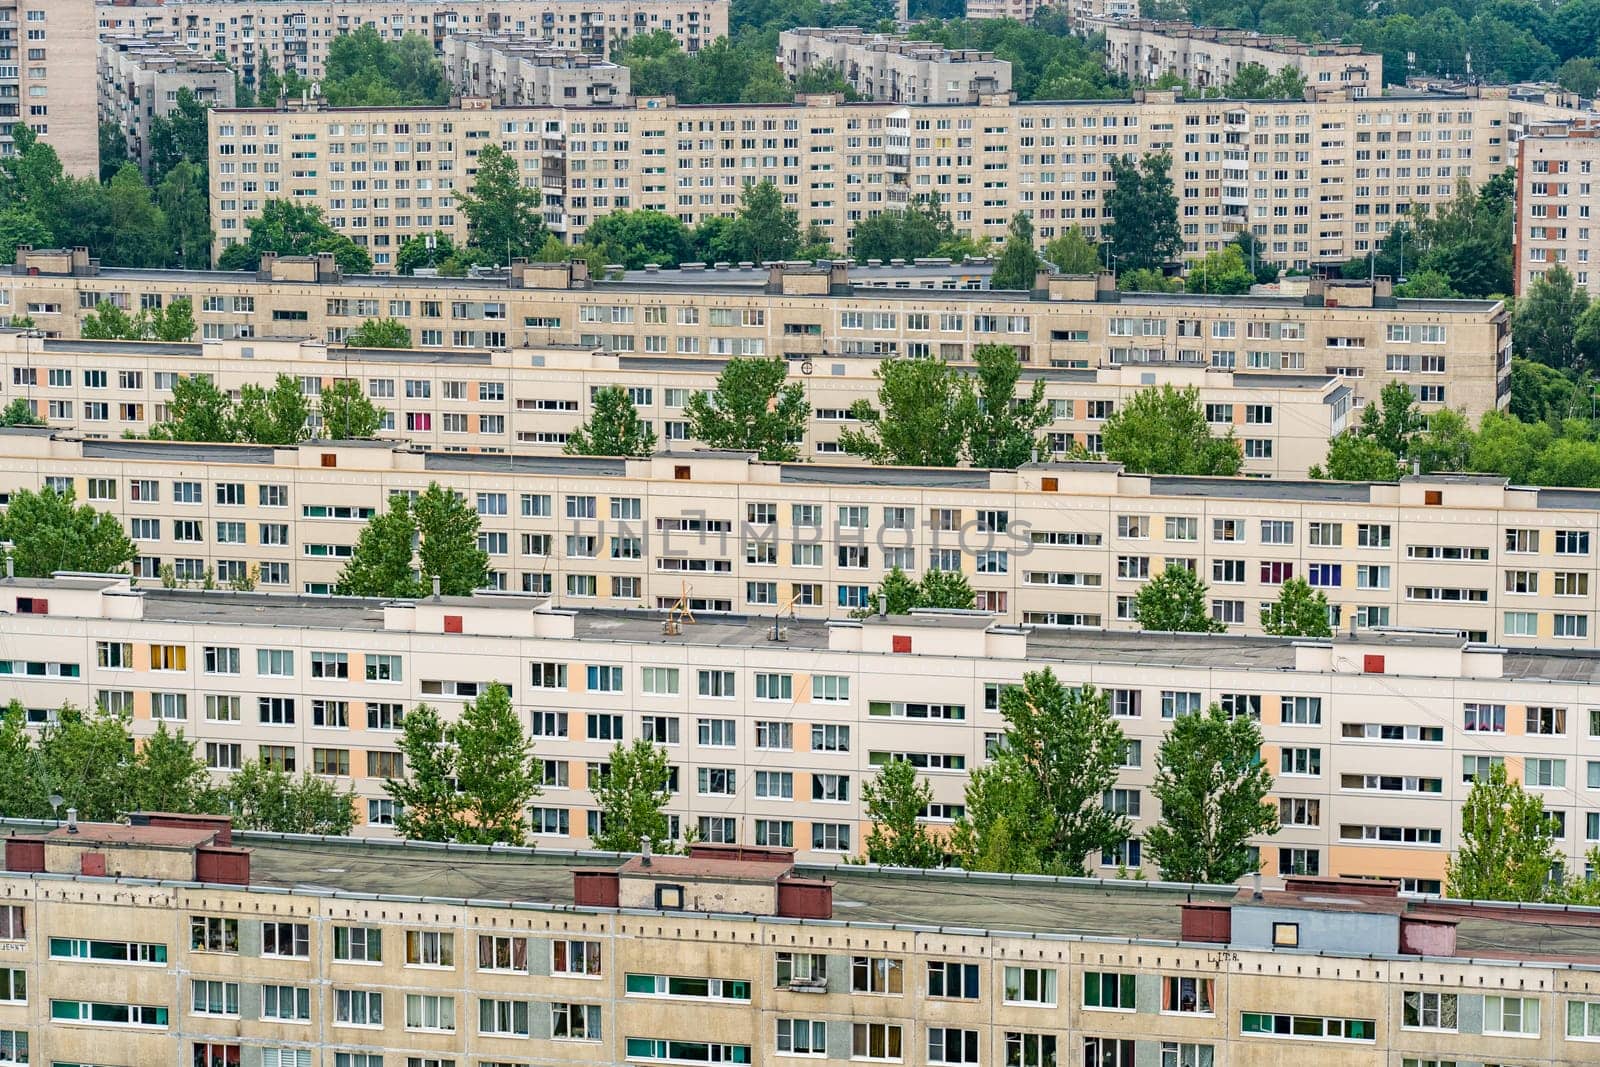 Multi-storey residential apartment buildings in a residential area